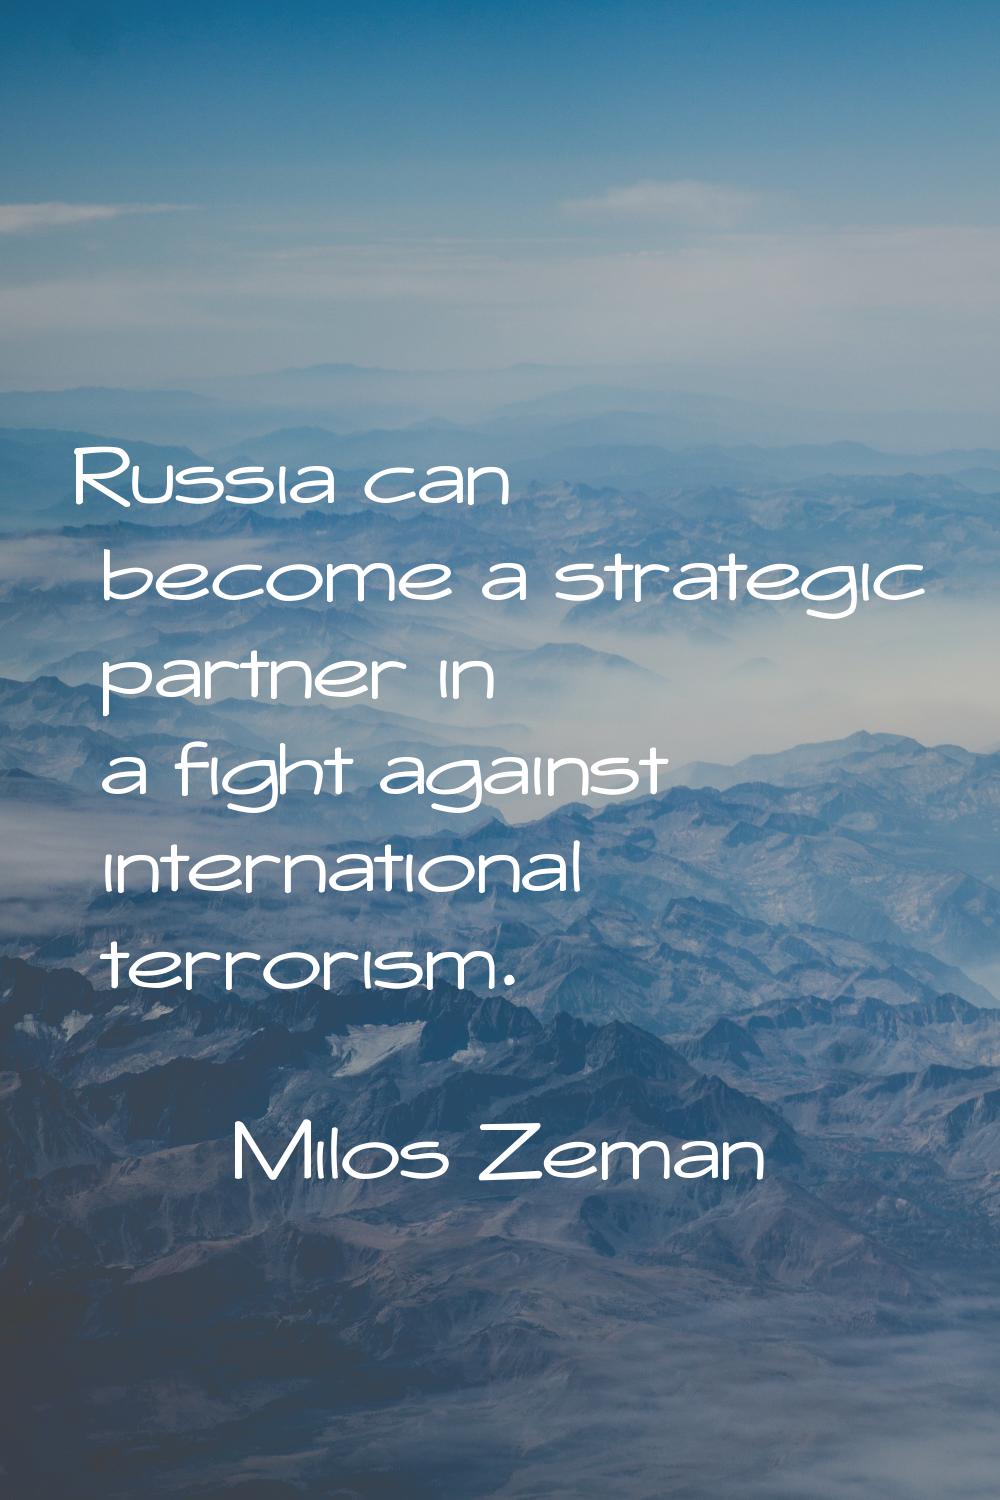 Russia can become a strategic partner in a fight against international terrorism.